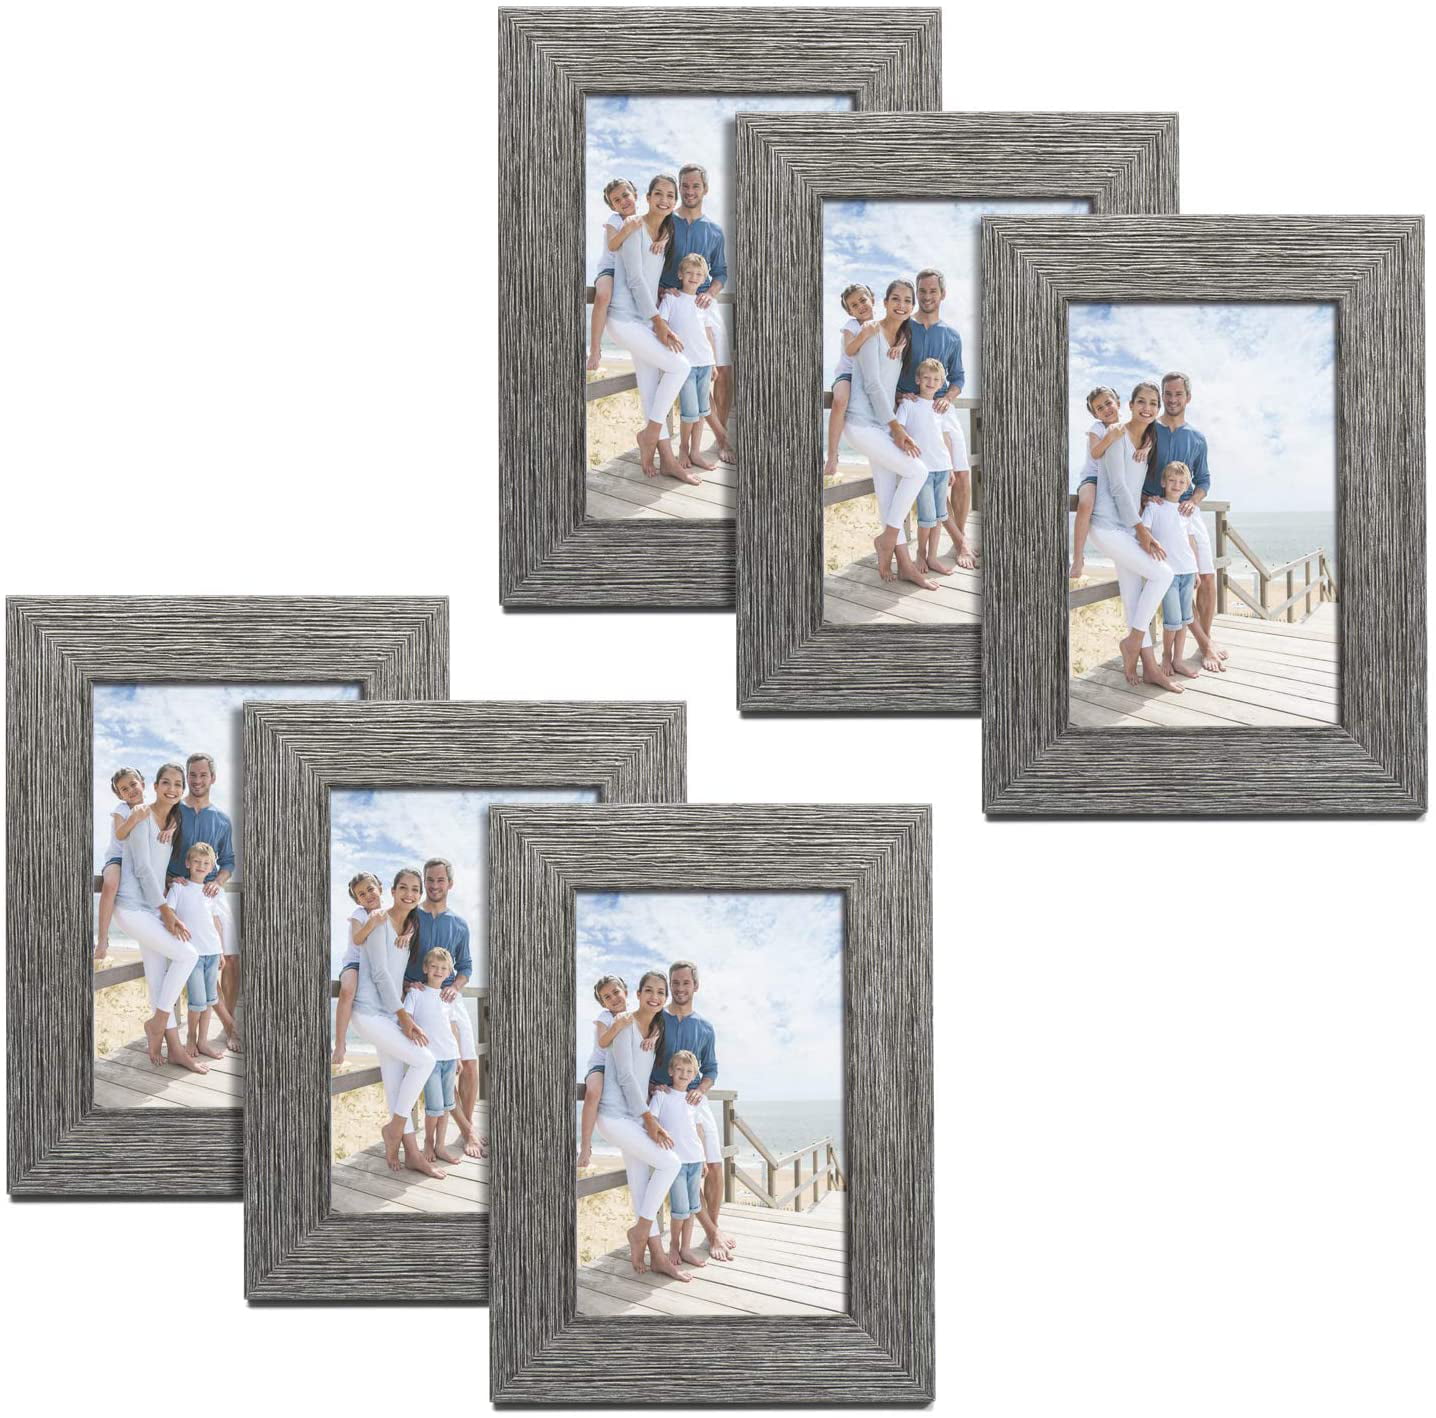 4 Pcs 5x7 Picture Frames Rustic Distressed Wood Pattern High Definition Glass 